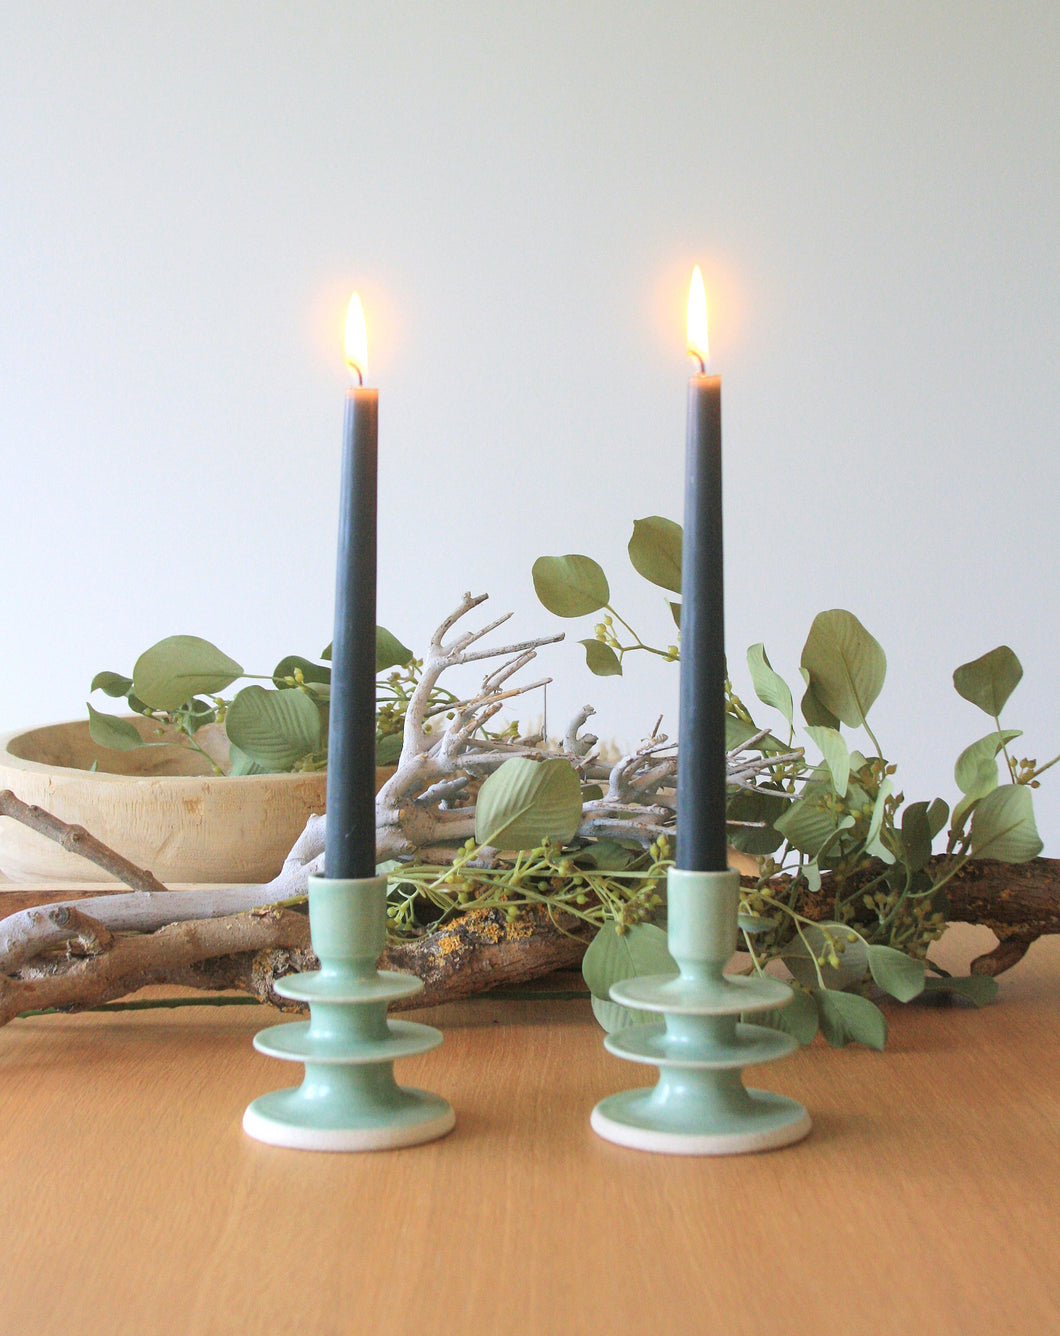 Green Tiered Candlestick Holder by Izzy Letty. Shop the range of hand sourced ceramics and glassware by Rebecca Arts online.